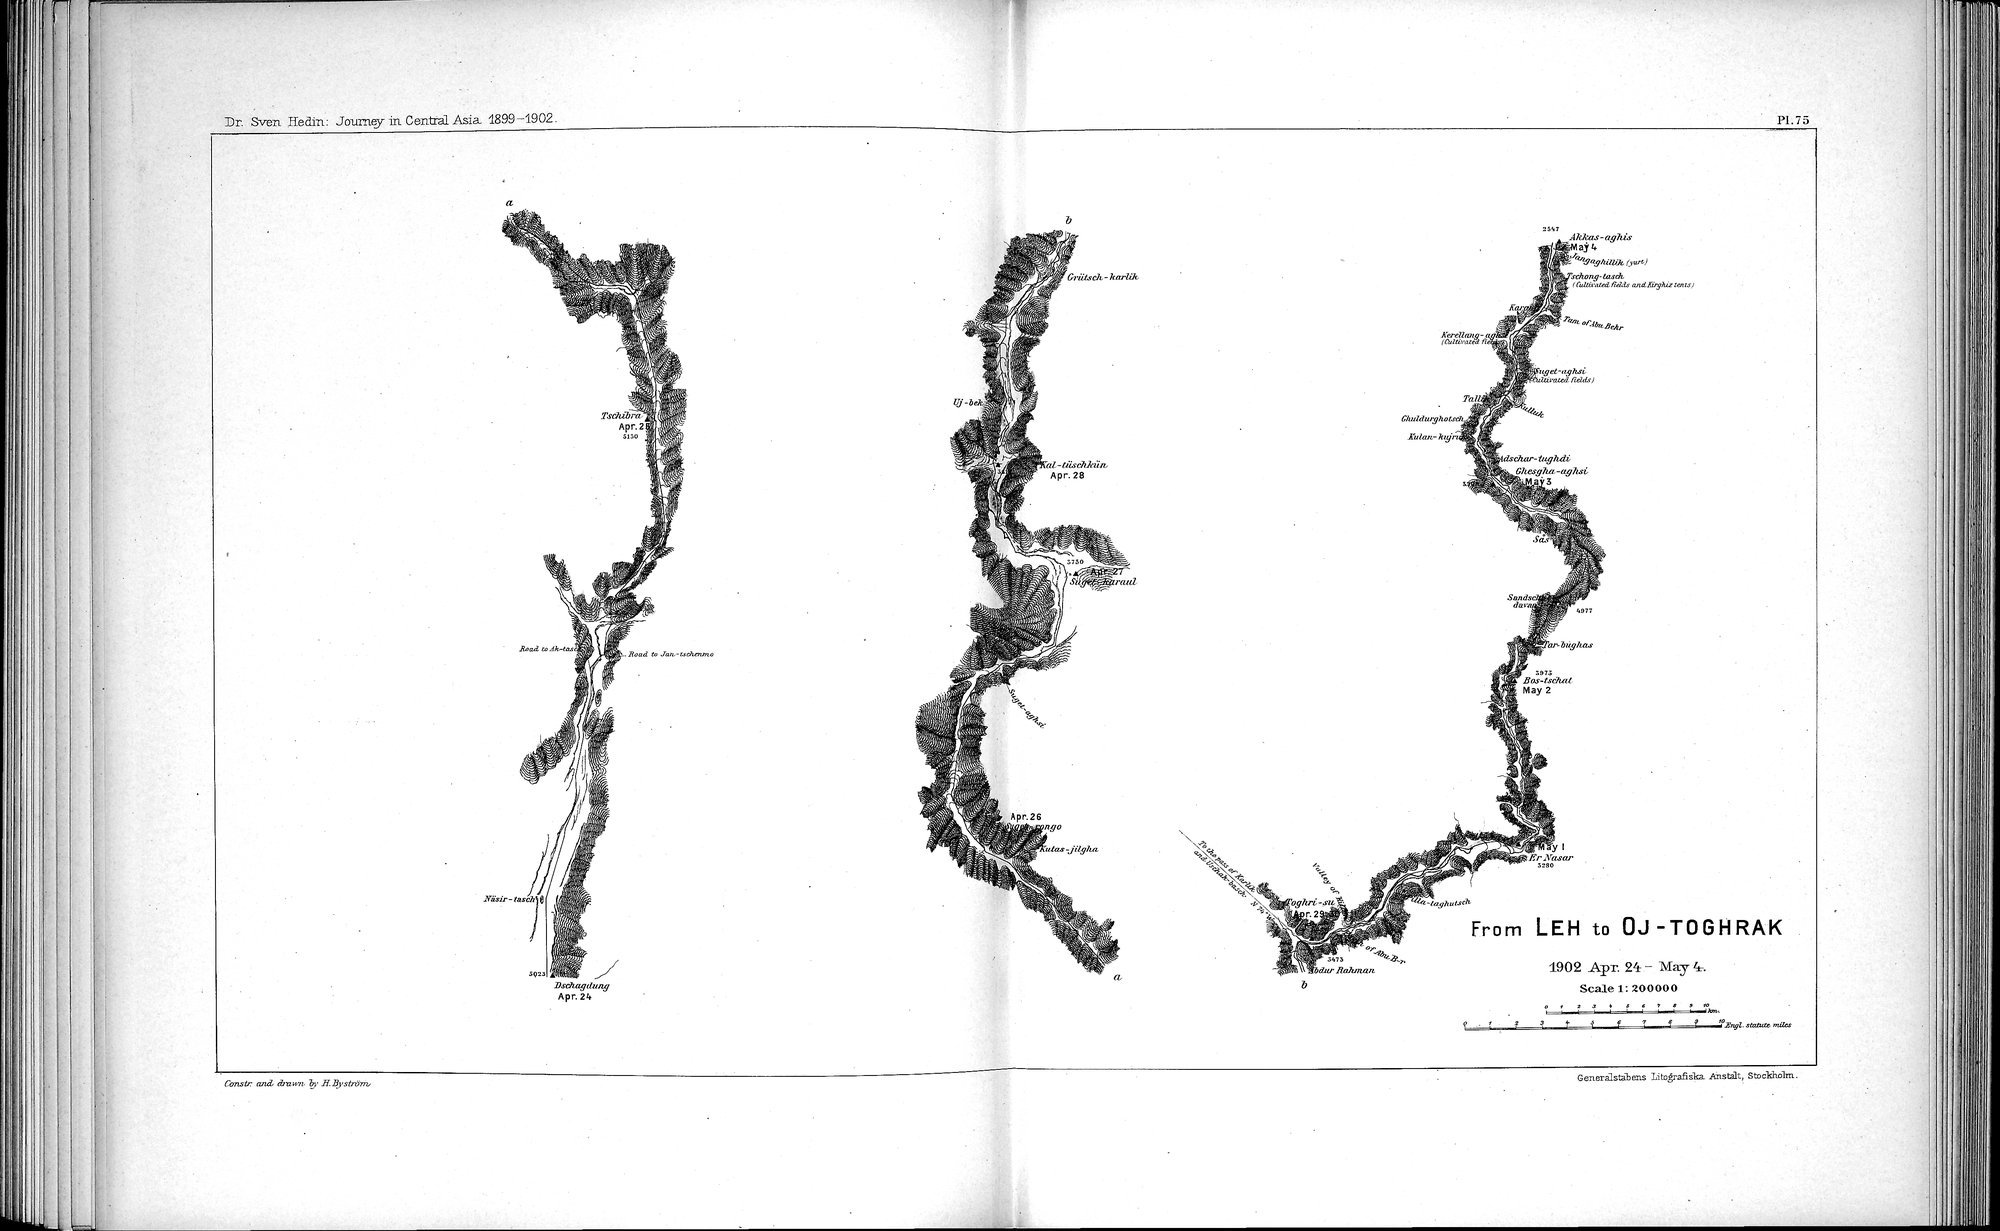 Scientific Results of a Journey in Central Asia, 1899-1902 : vol.8 / 120 ページ（白黒高解像度画像）